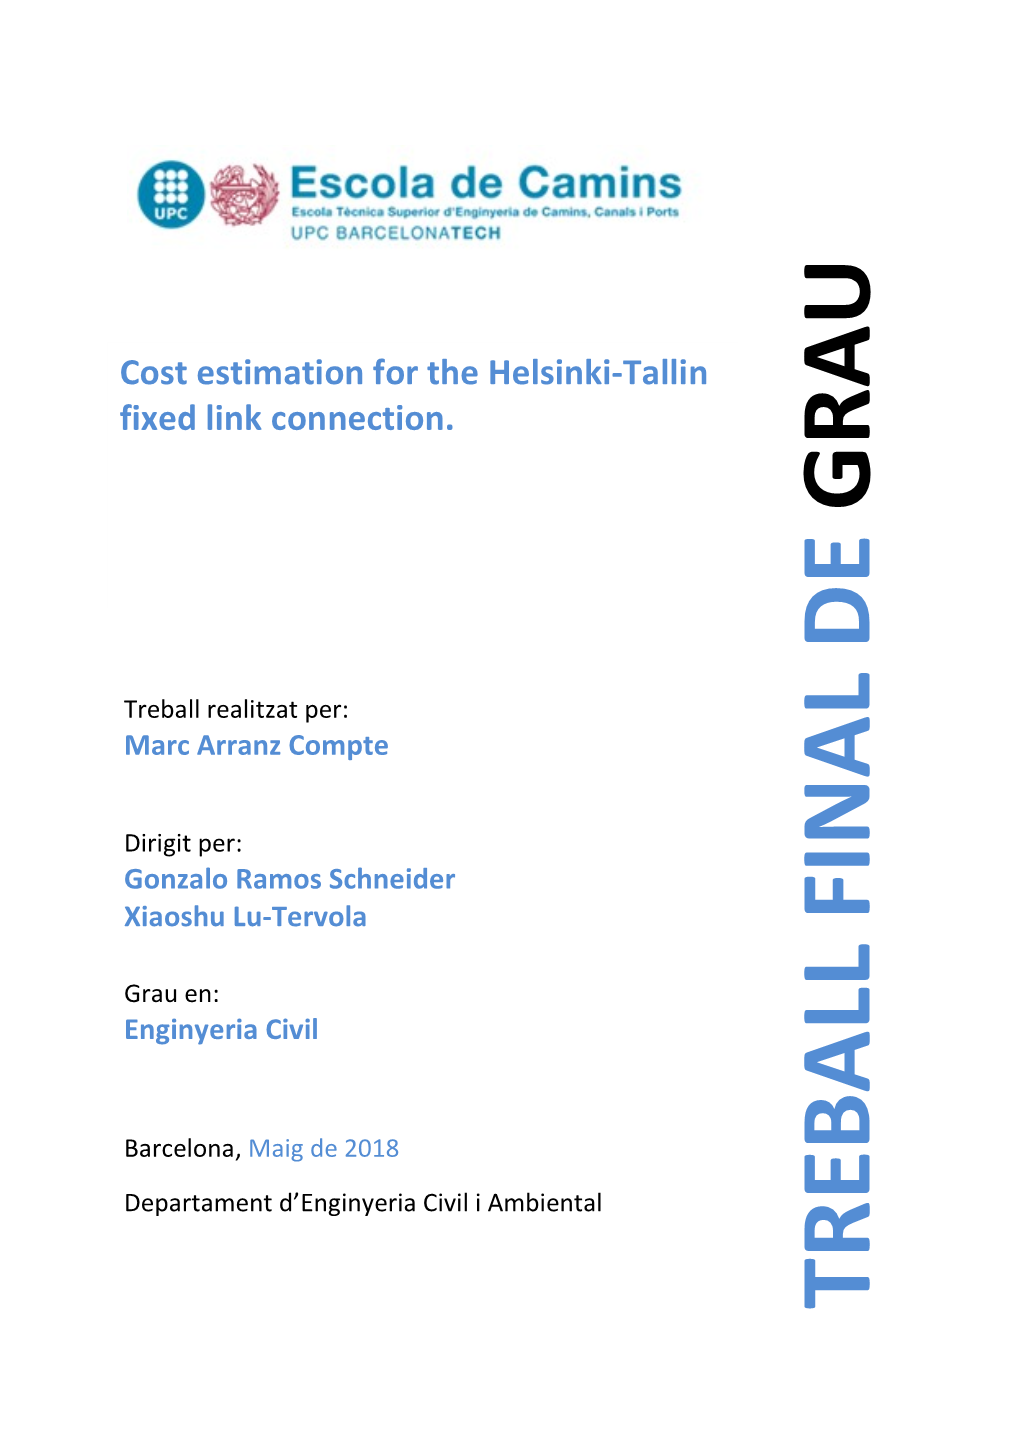 Cost Estimation for the Helsinki-Tallin Fixed Link Connection